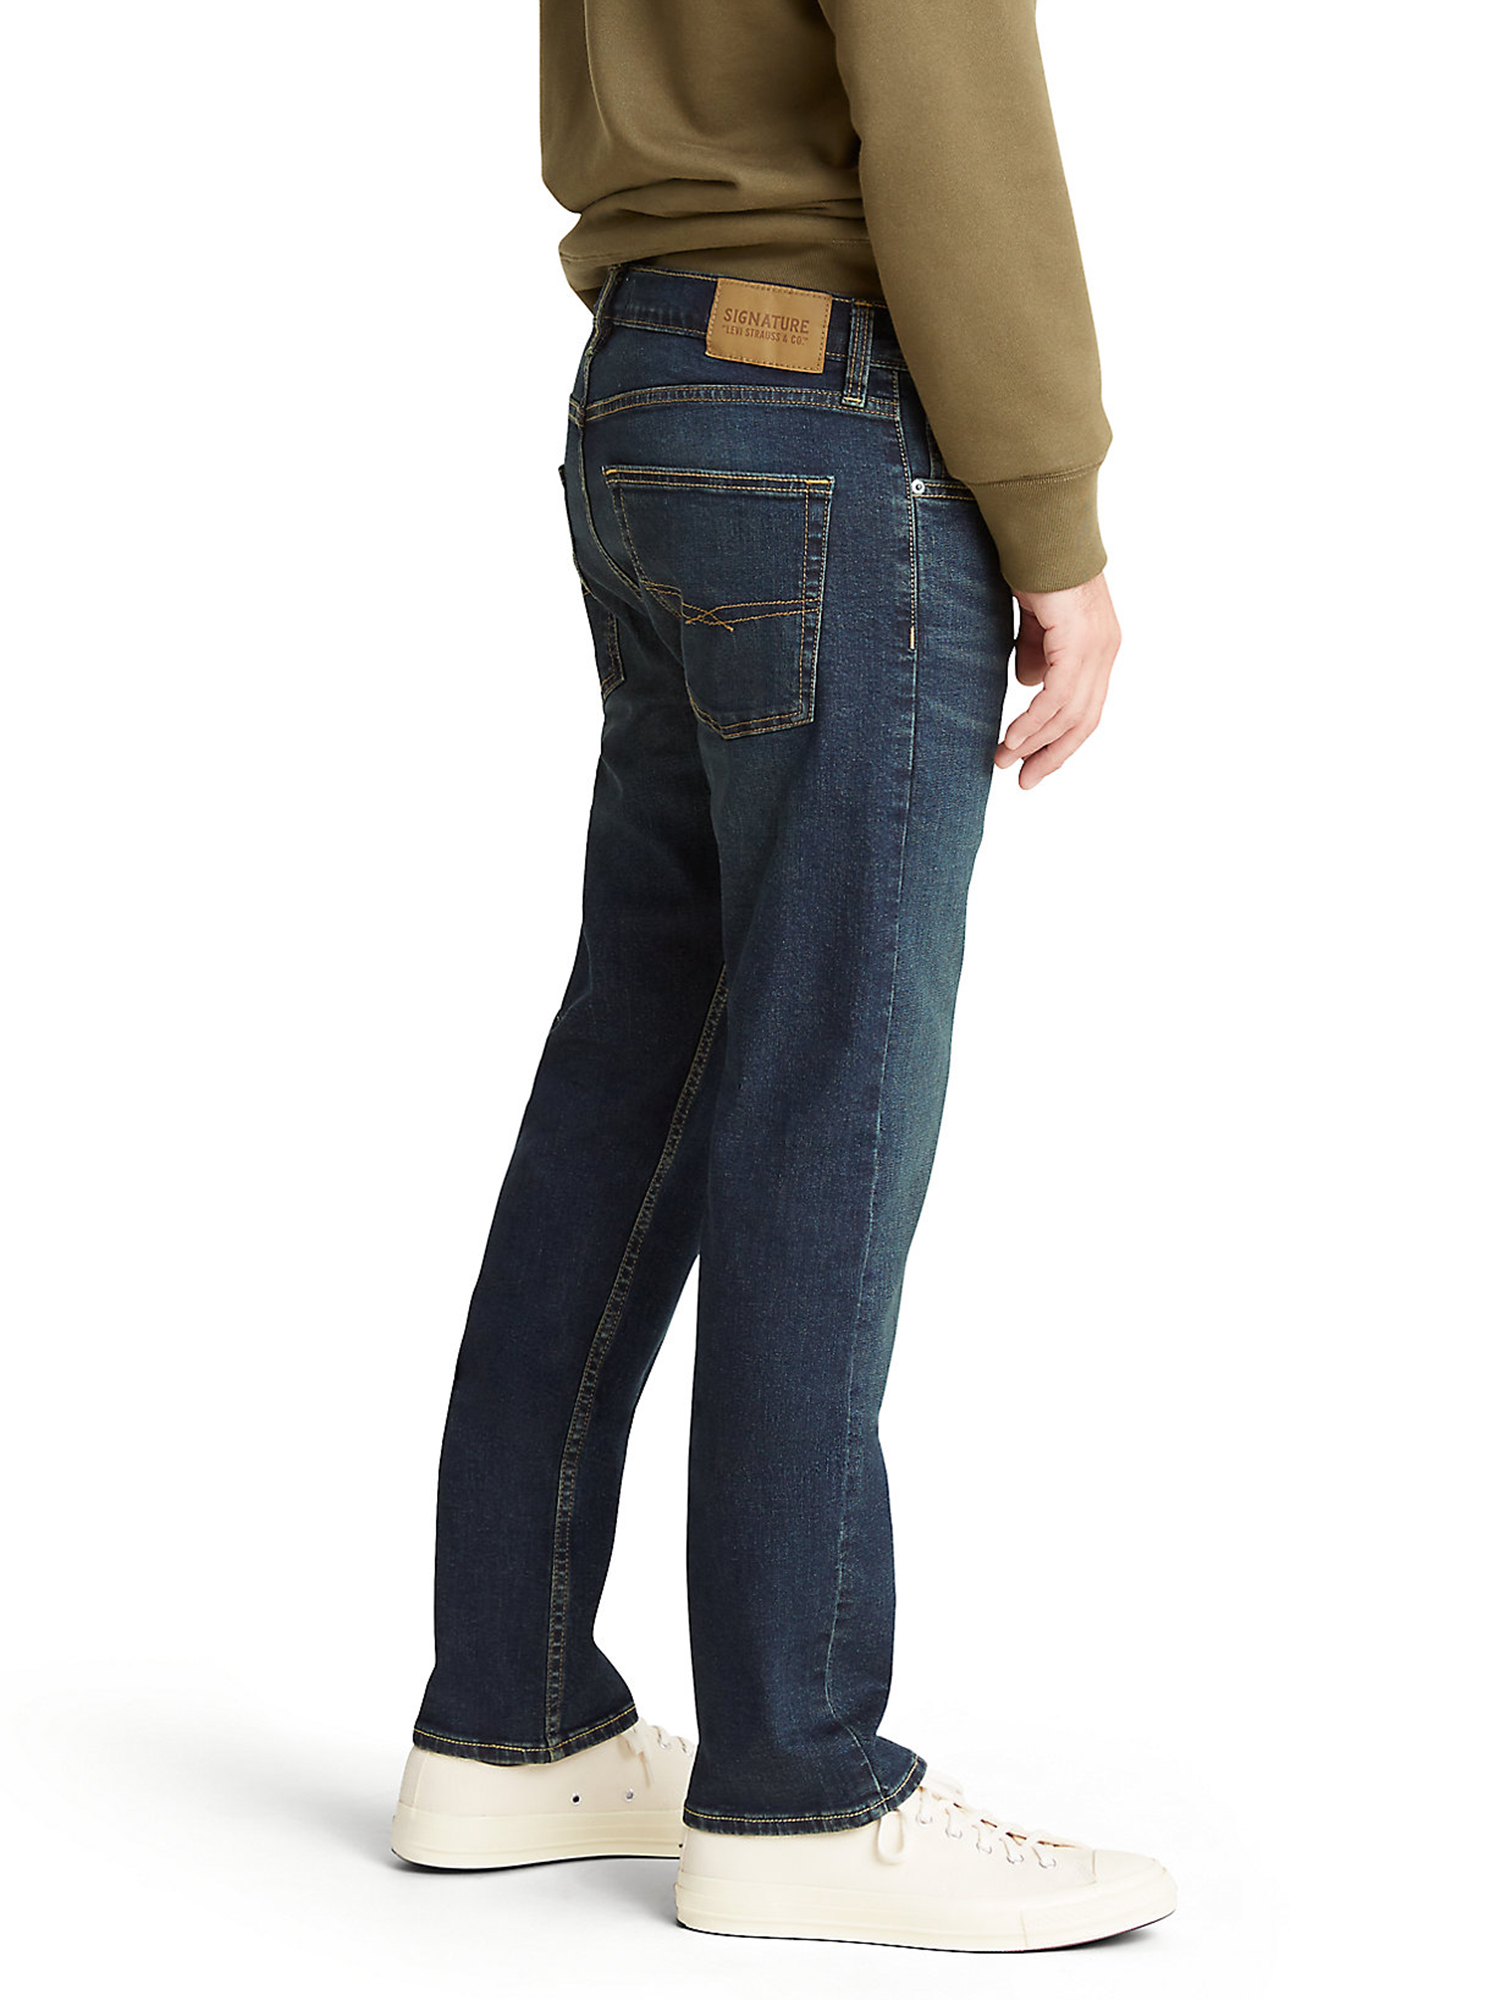 Signature by Levi Strauss & Co. Men's and Big and Tall Straight Fit Jeans - image 5 of 7